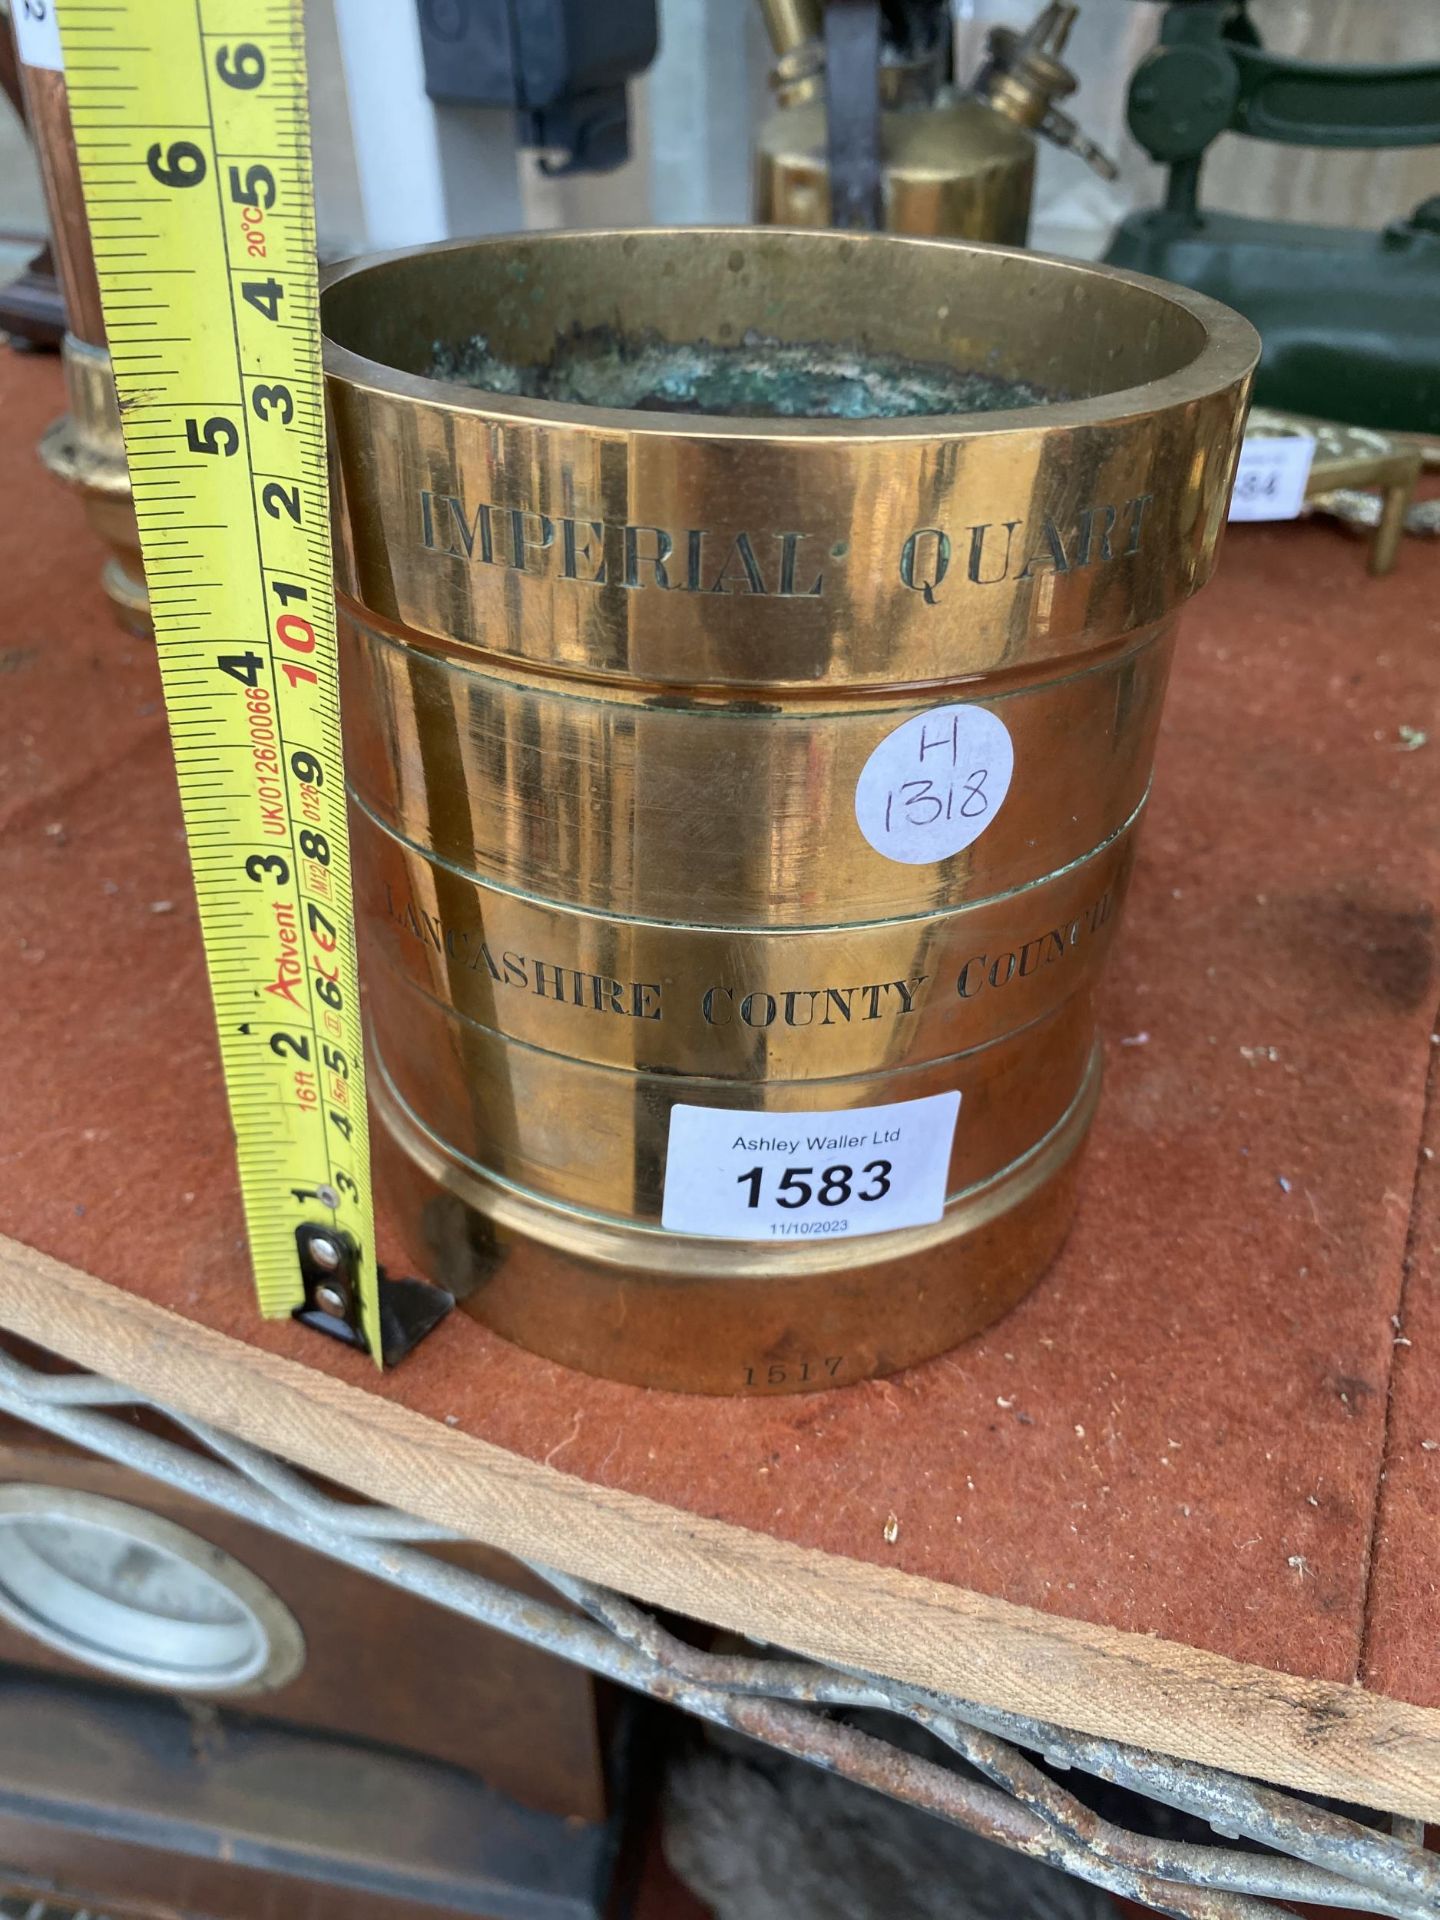 A VINTAGE BRASS IMPERIAL QUART 'LANCASHIRE COUNTY COUNCIL' MEASURING CUP - Image 4 of 5